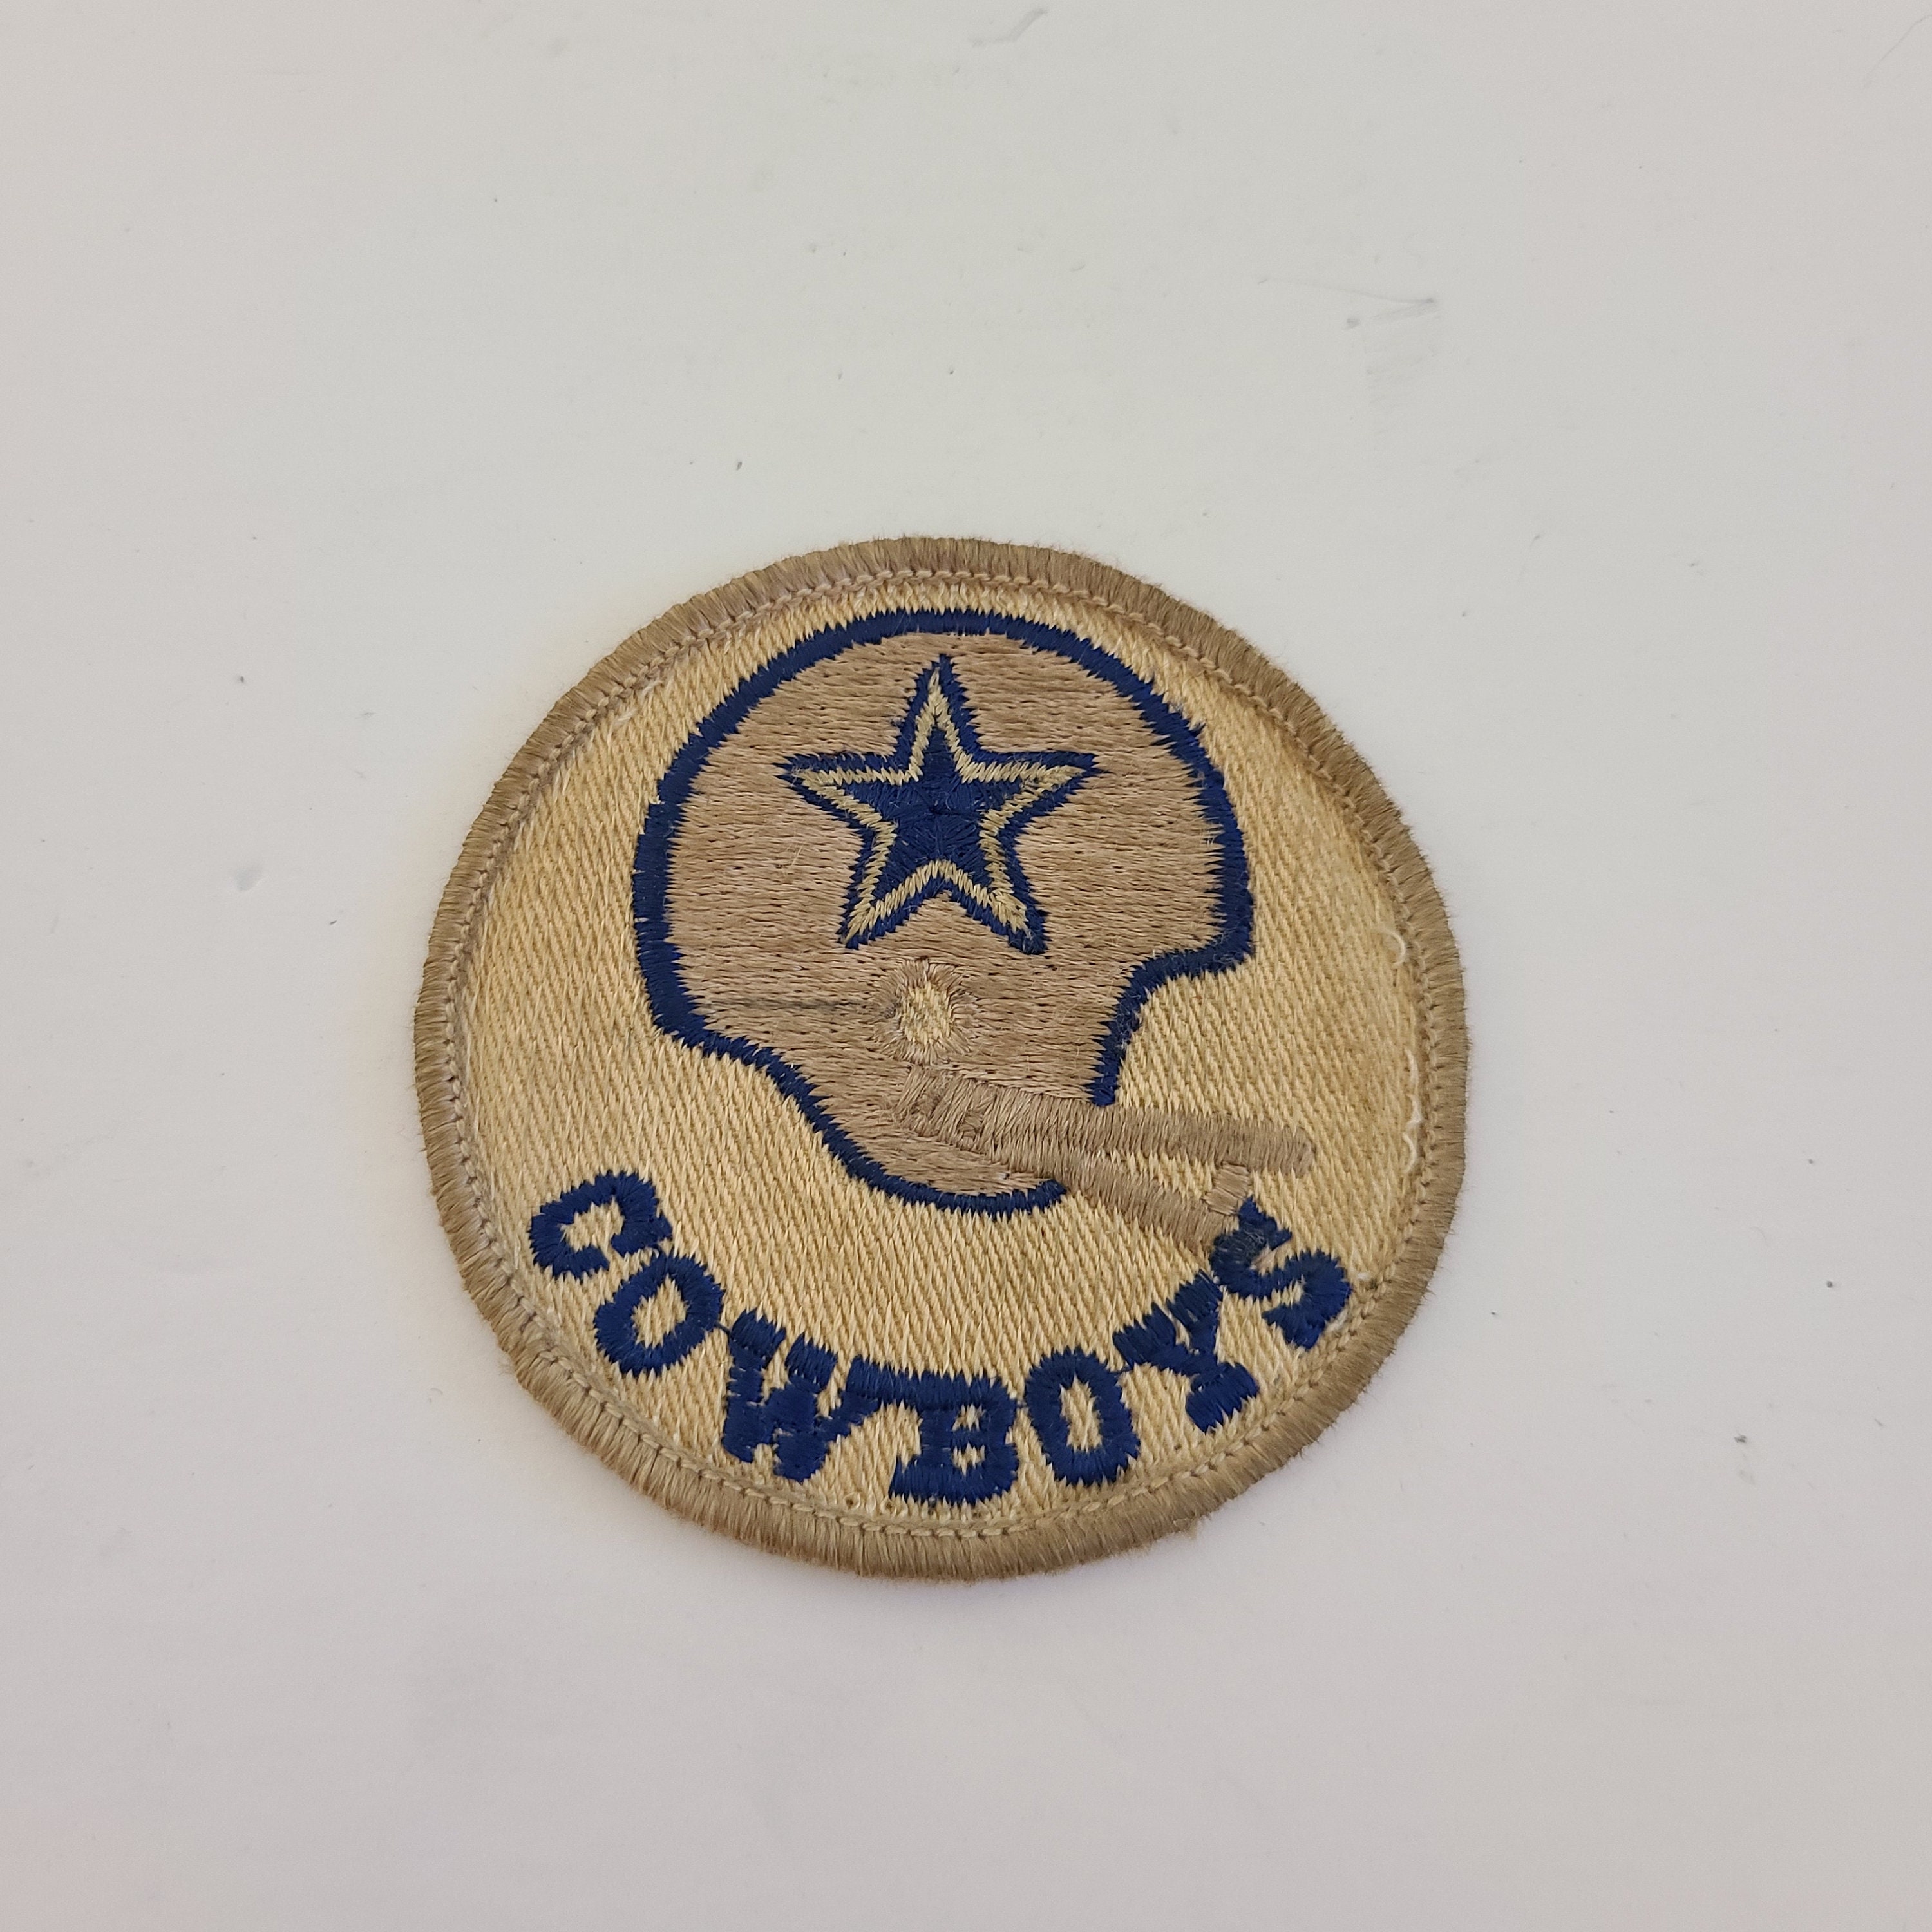 Vintage Circa 1970's Old Embroidered NFL Patch Dallas 